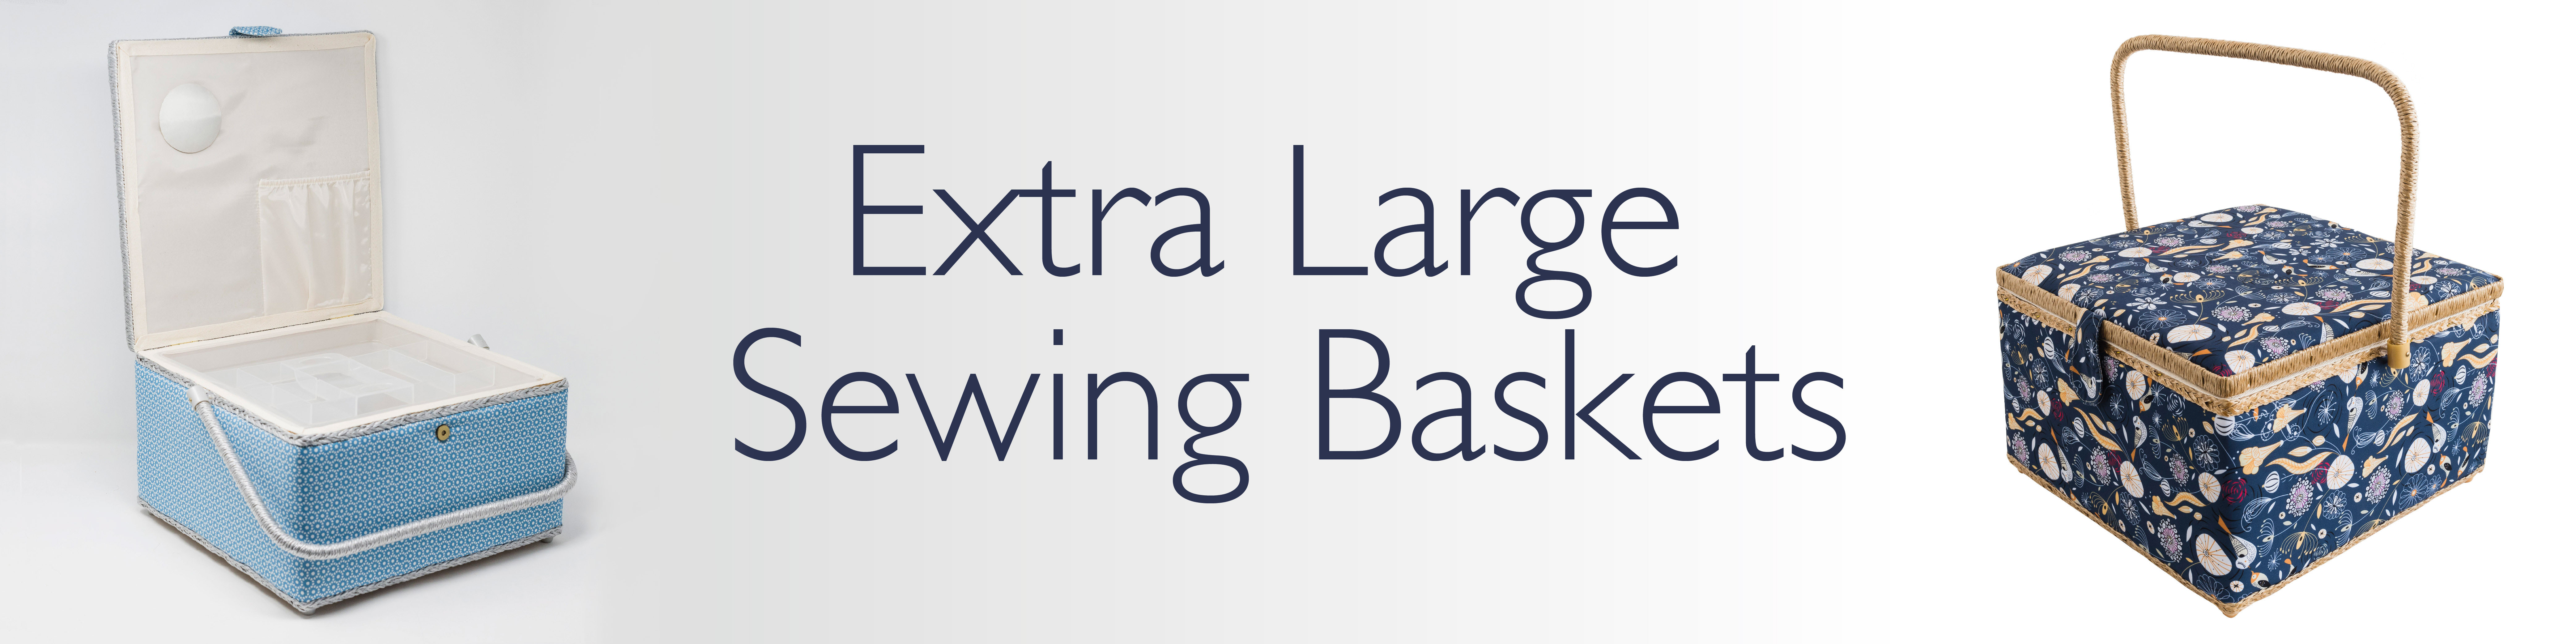 Extra Large Sewing Baskets